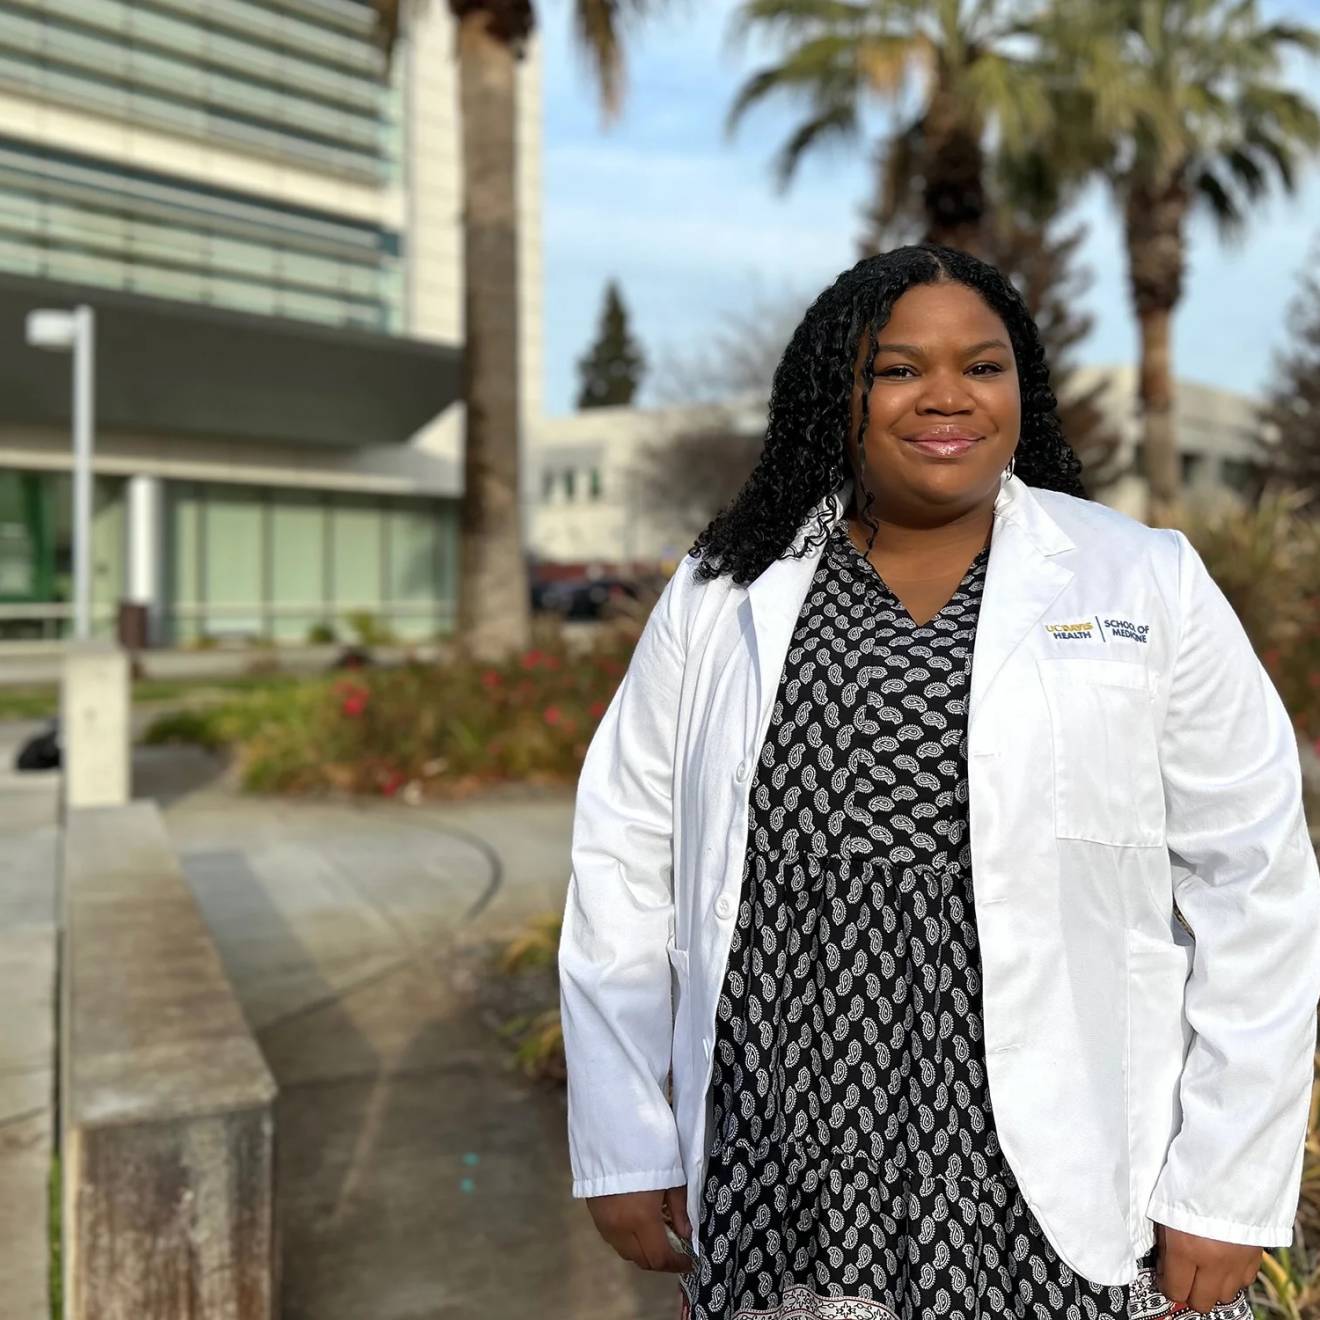 Chelsea Nash wears a black and white polka dot dress and white doctor coat, smiling for a portrait outside of a medical building at UC Davis